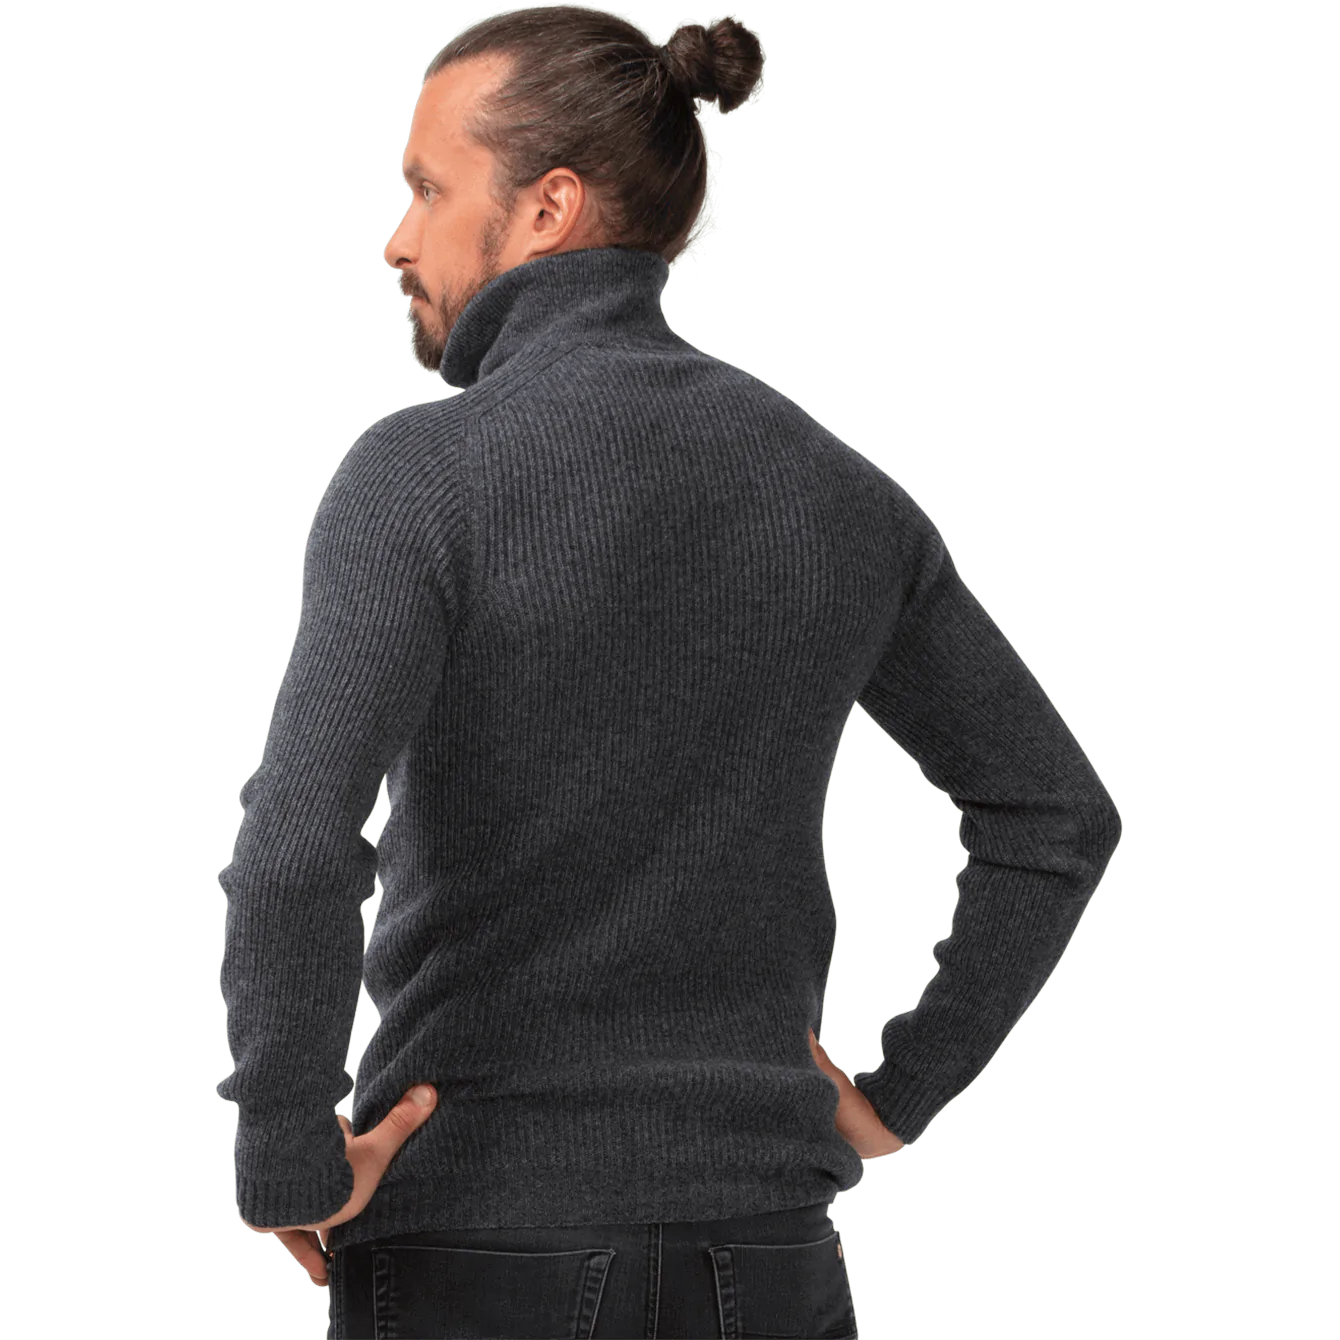 north-outdoor-madeinfinland-metso-m-pullover-graphite-grey-pose-2-back-fw19-n11703g05_4f916bd8-385c-4f4e-bafe-90235d05caee_1800x1800